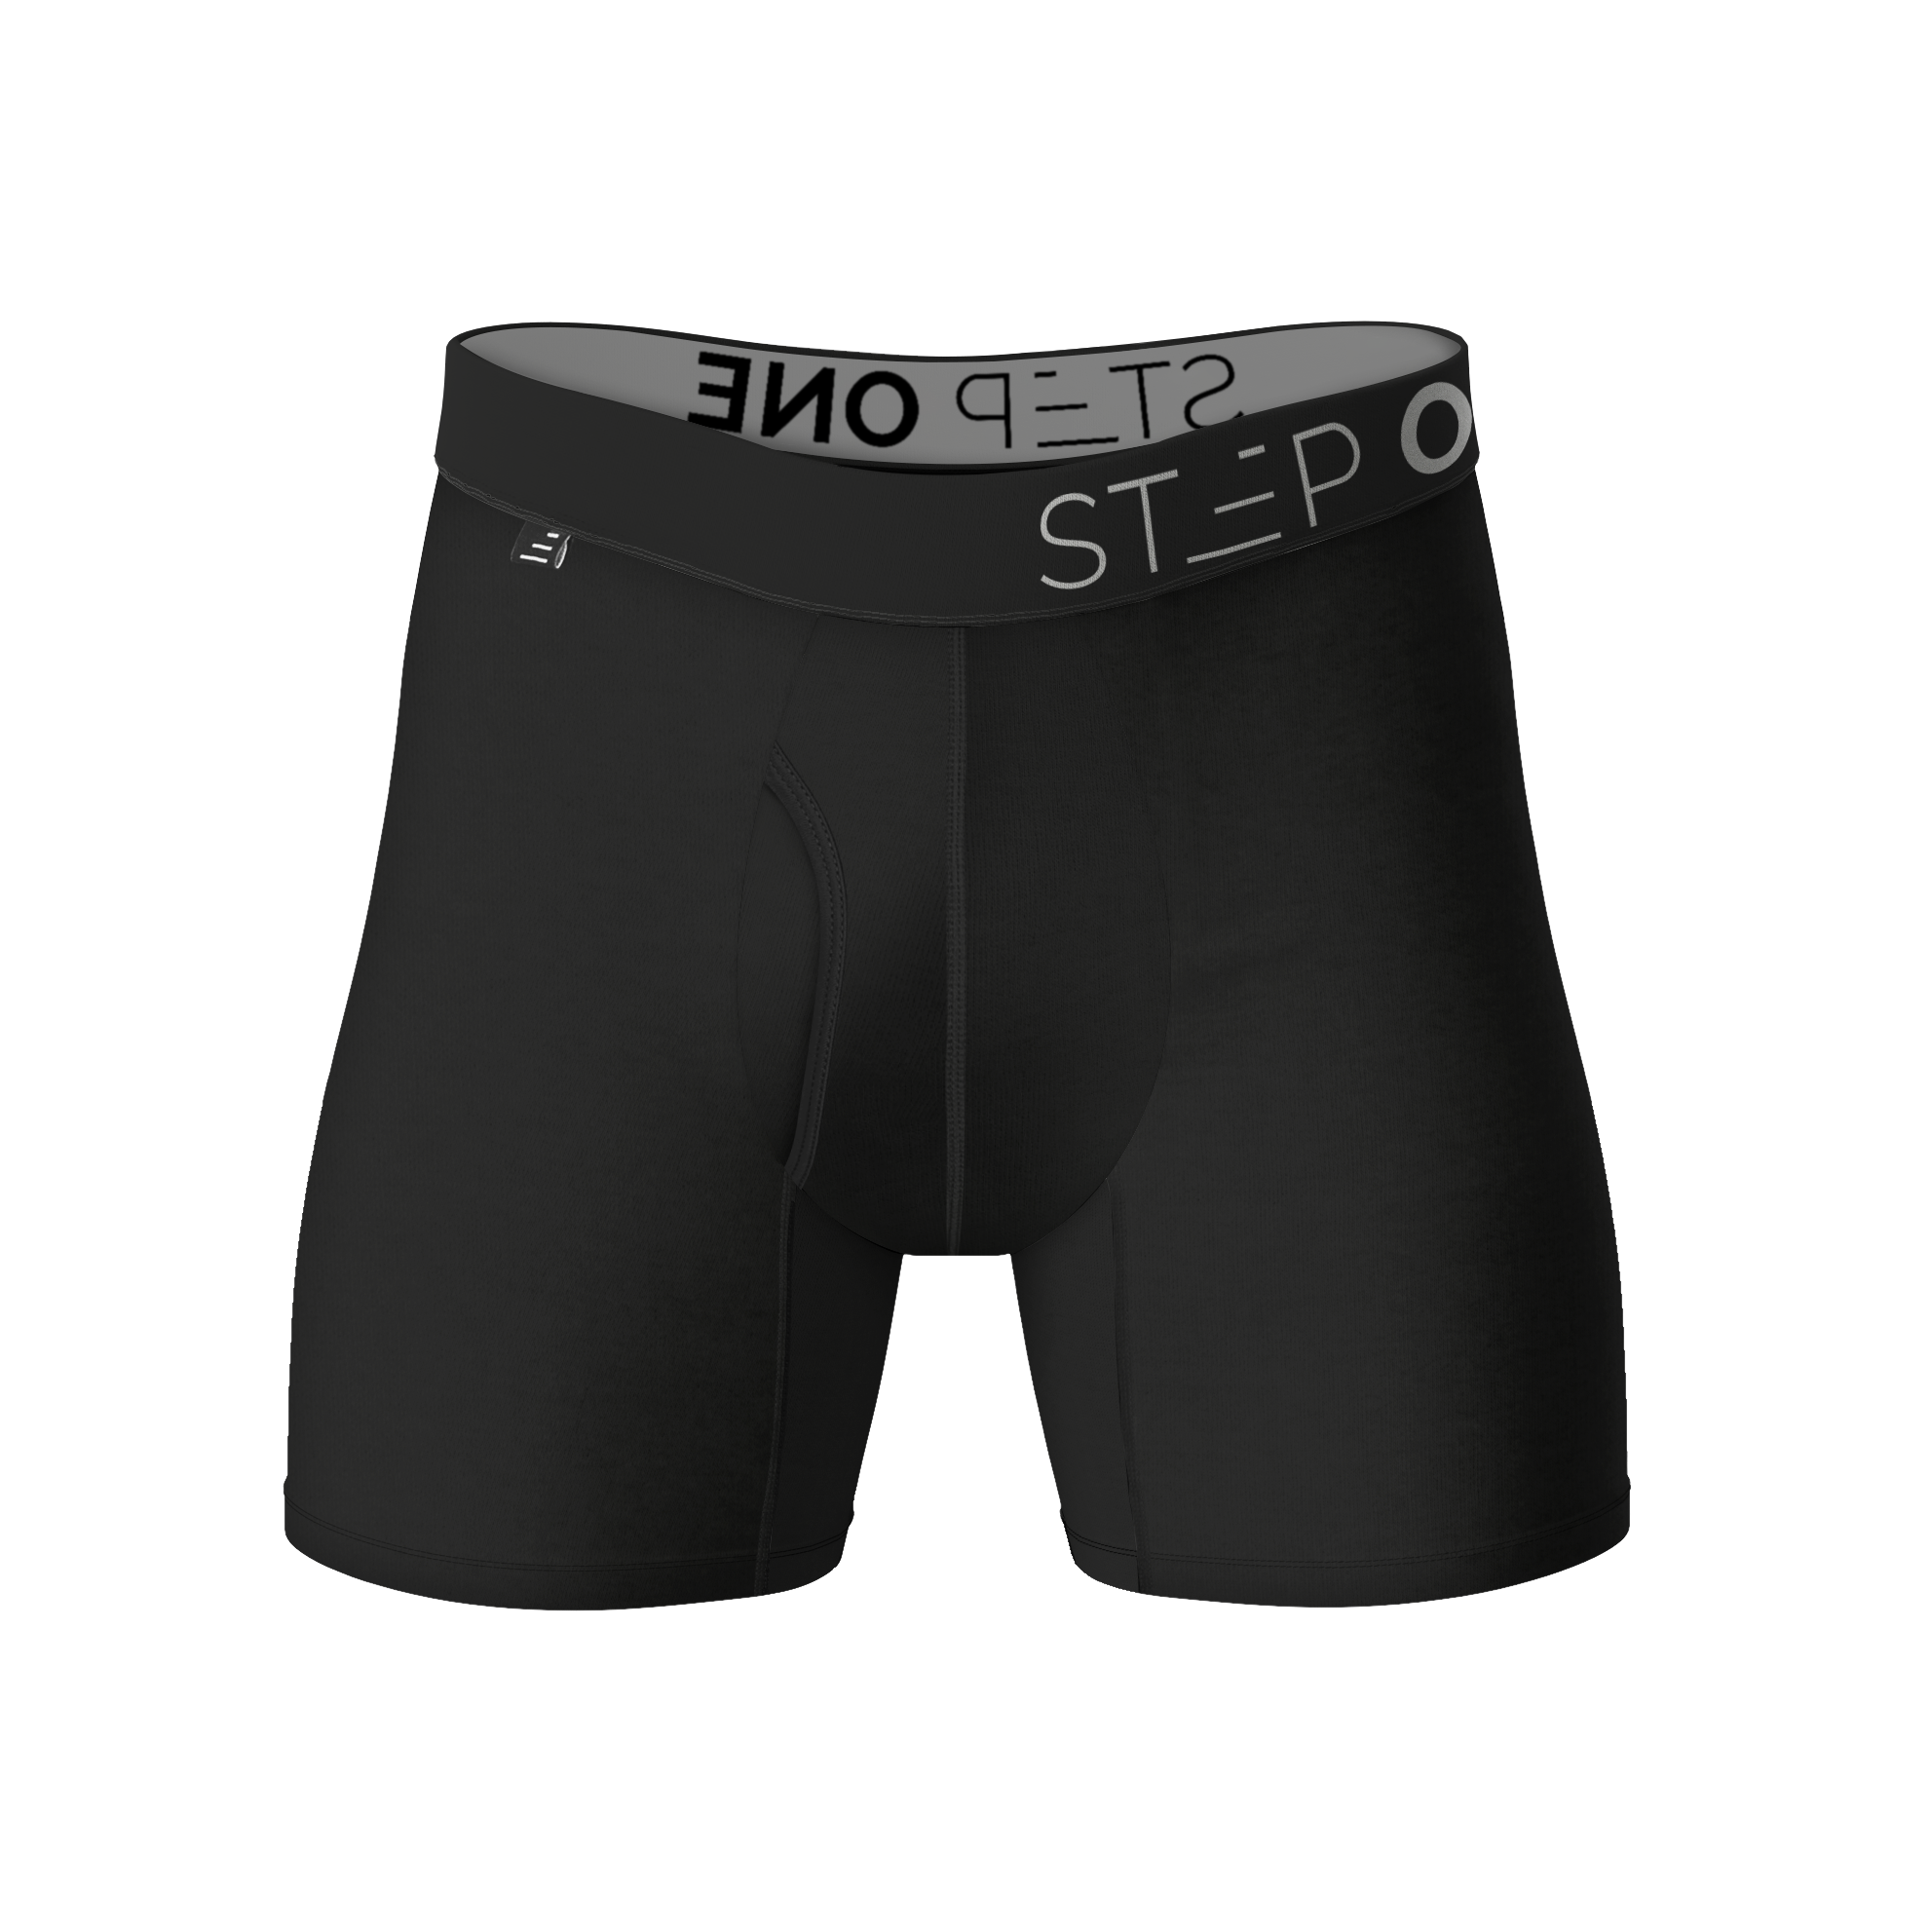 Boxer Brief +Fly - Scorpians - View 1